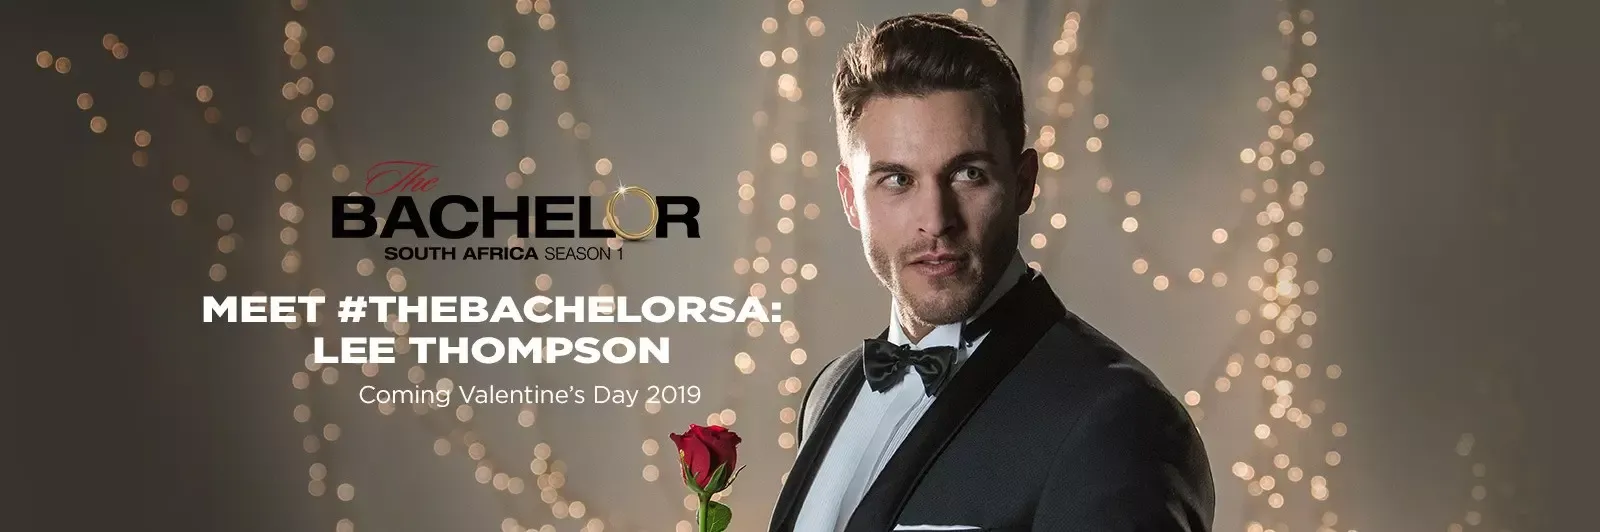 LoveInVariousForms - Bachelor South Africa - Lee Thompson - Season 1 - Media SM - *Sleuthing Spoilers* 1538985735-27_The_Bachelor_Article_